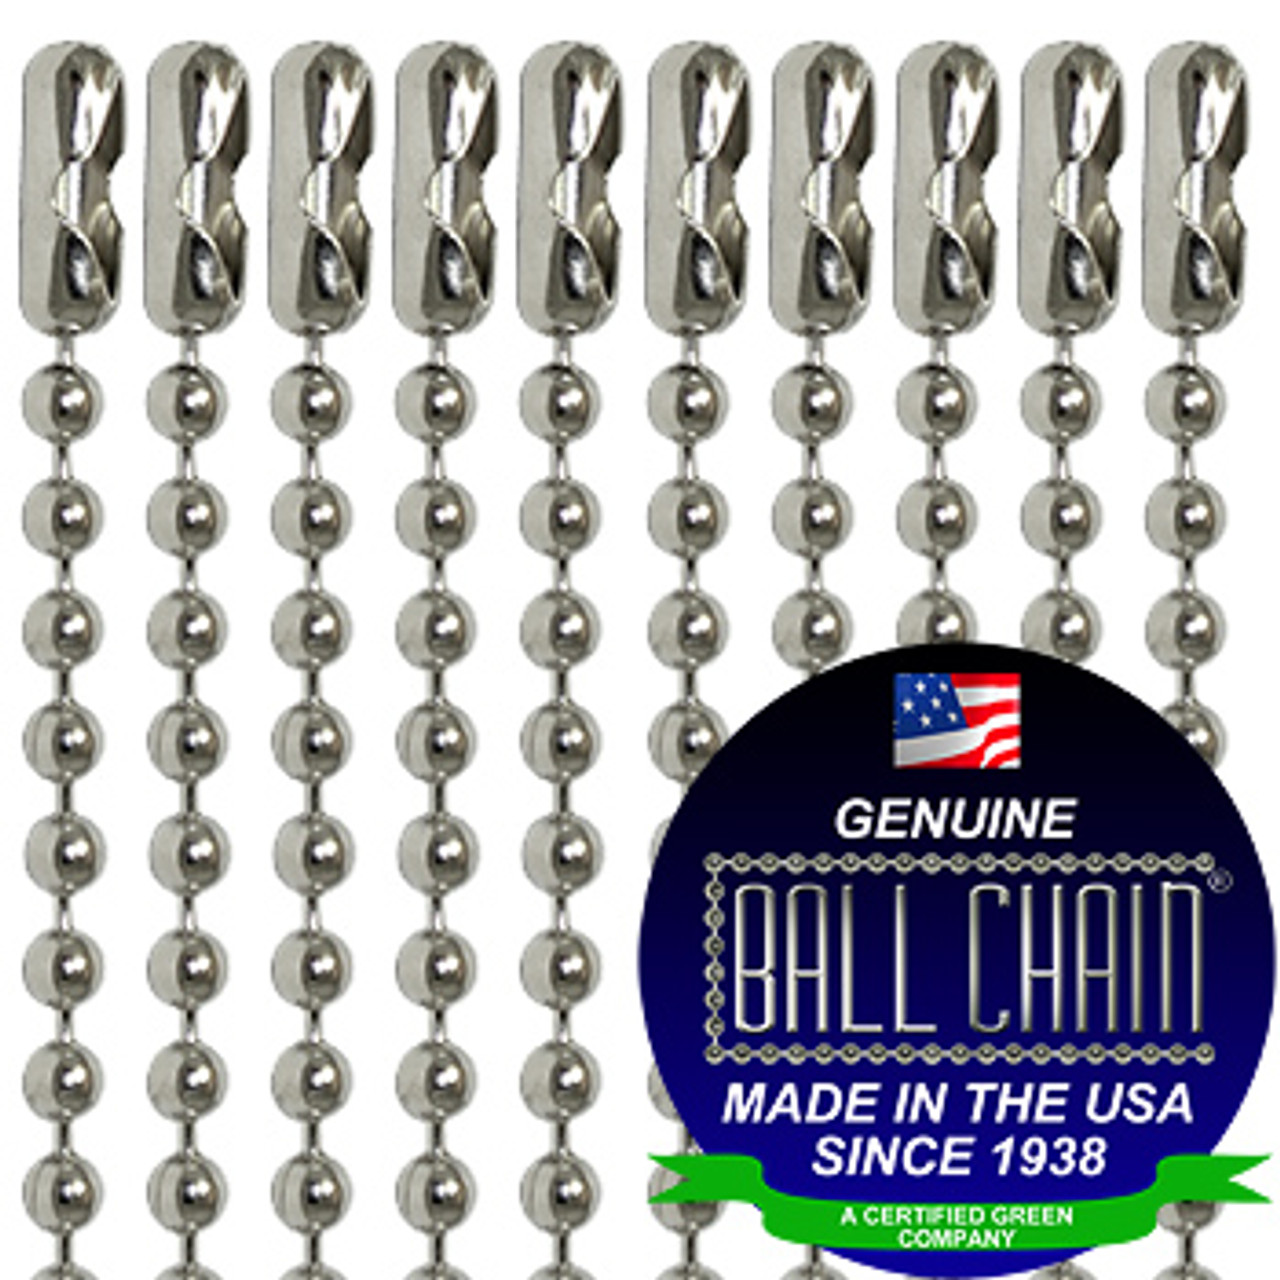 6 Nickel Plated Brass Ball Chain Connectors